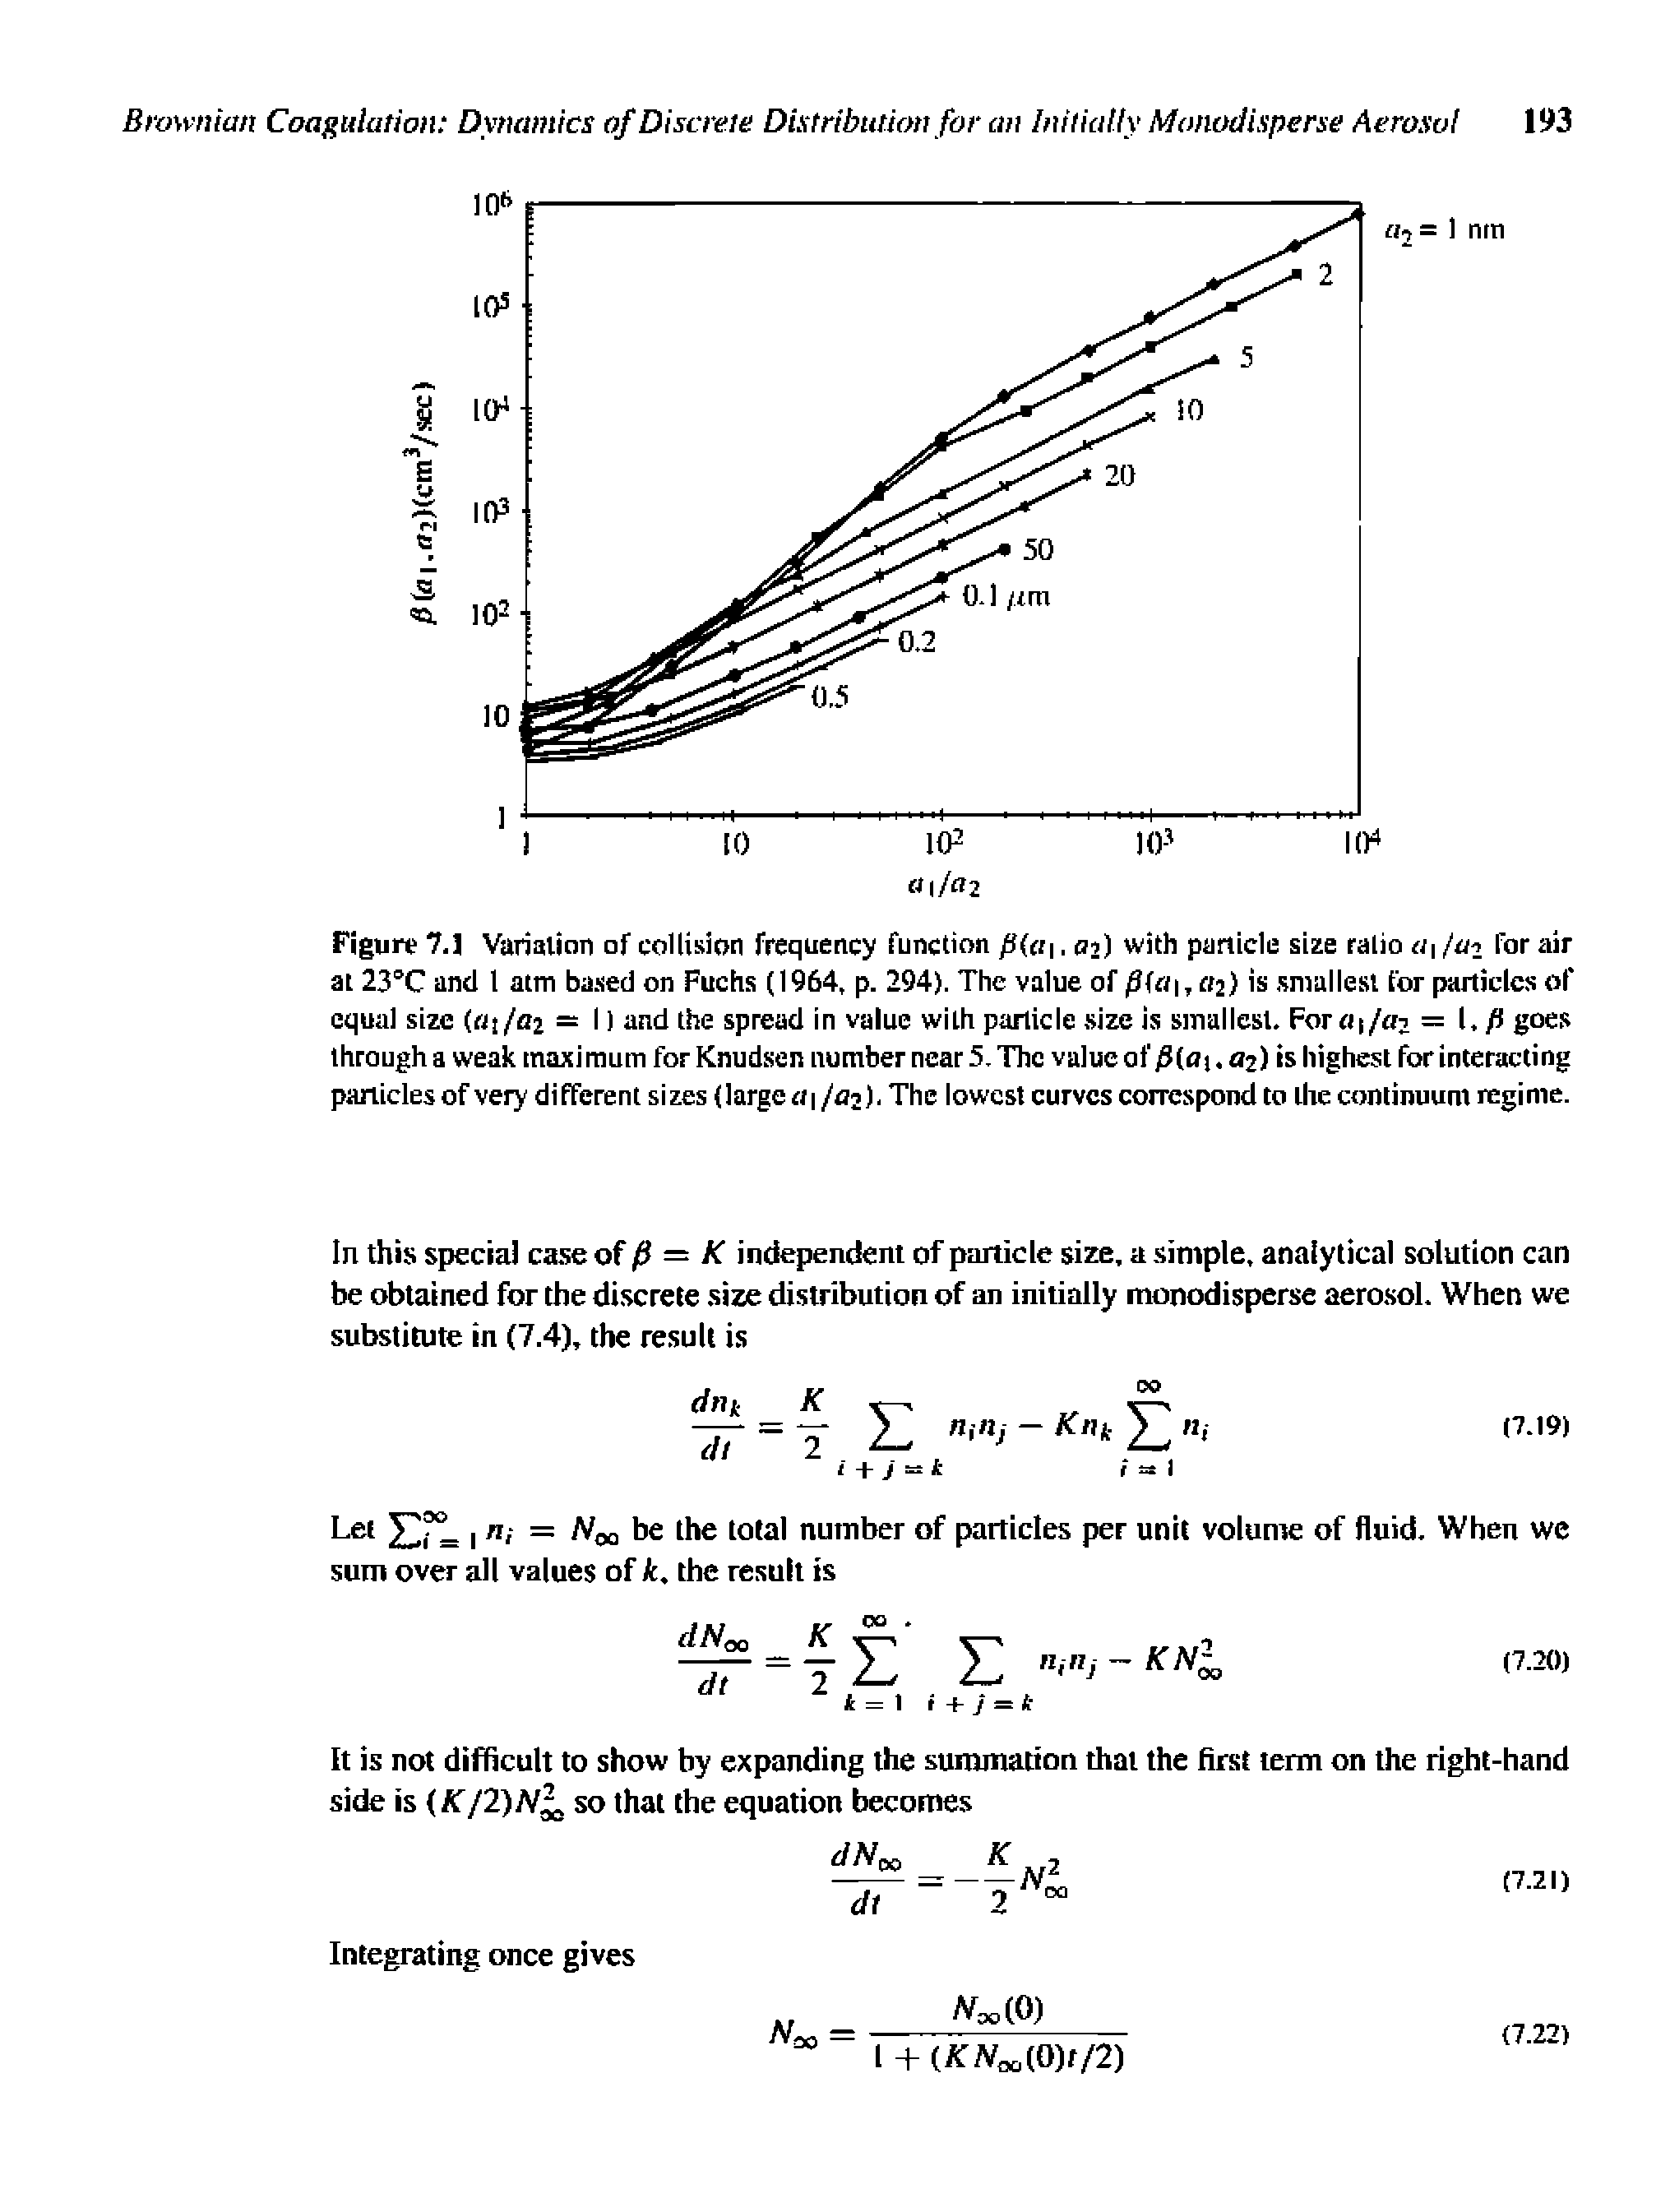 Figure 7.] Varialicin of collision frequency function (i(a. 02) with particle size ratio a ju2 for air at 23°C and 1 atm based on Fuchs (1964, p. 294). The value of f i, 2) is. smallest for particles of equal size (01/02 = I) and the spread in value with particle size is smallesl. Forrii/o =. P go< s through a weak maximum for Knudsen number near 5. The value of (0. 03) highest for interacting panicles of very different sizes (large 01/02). The lowest curves correspond to the continuum regime.